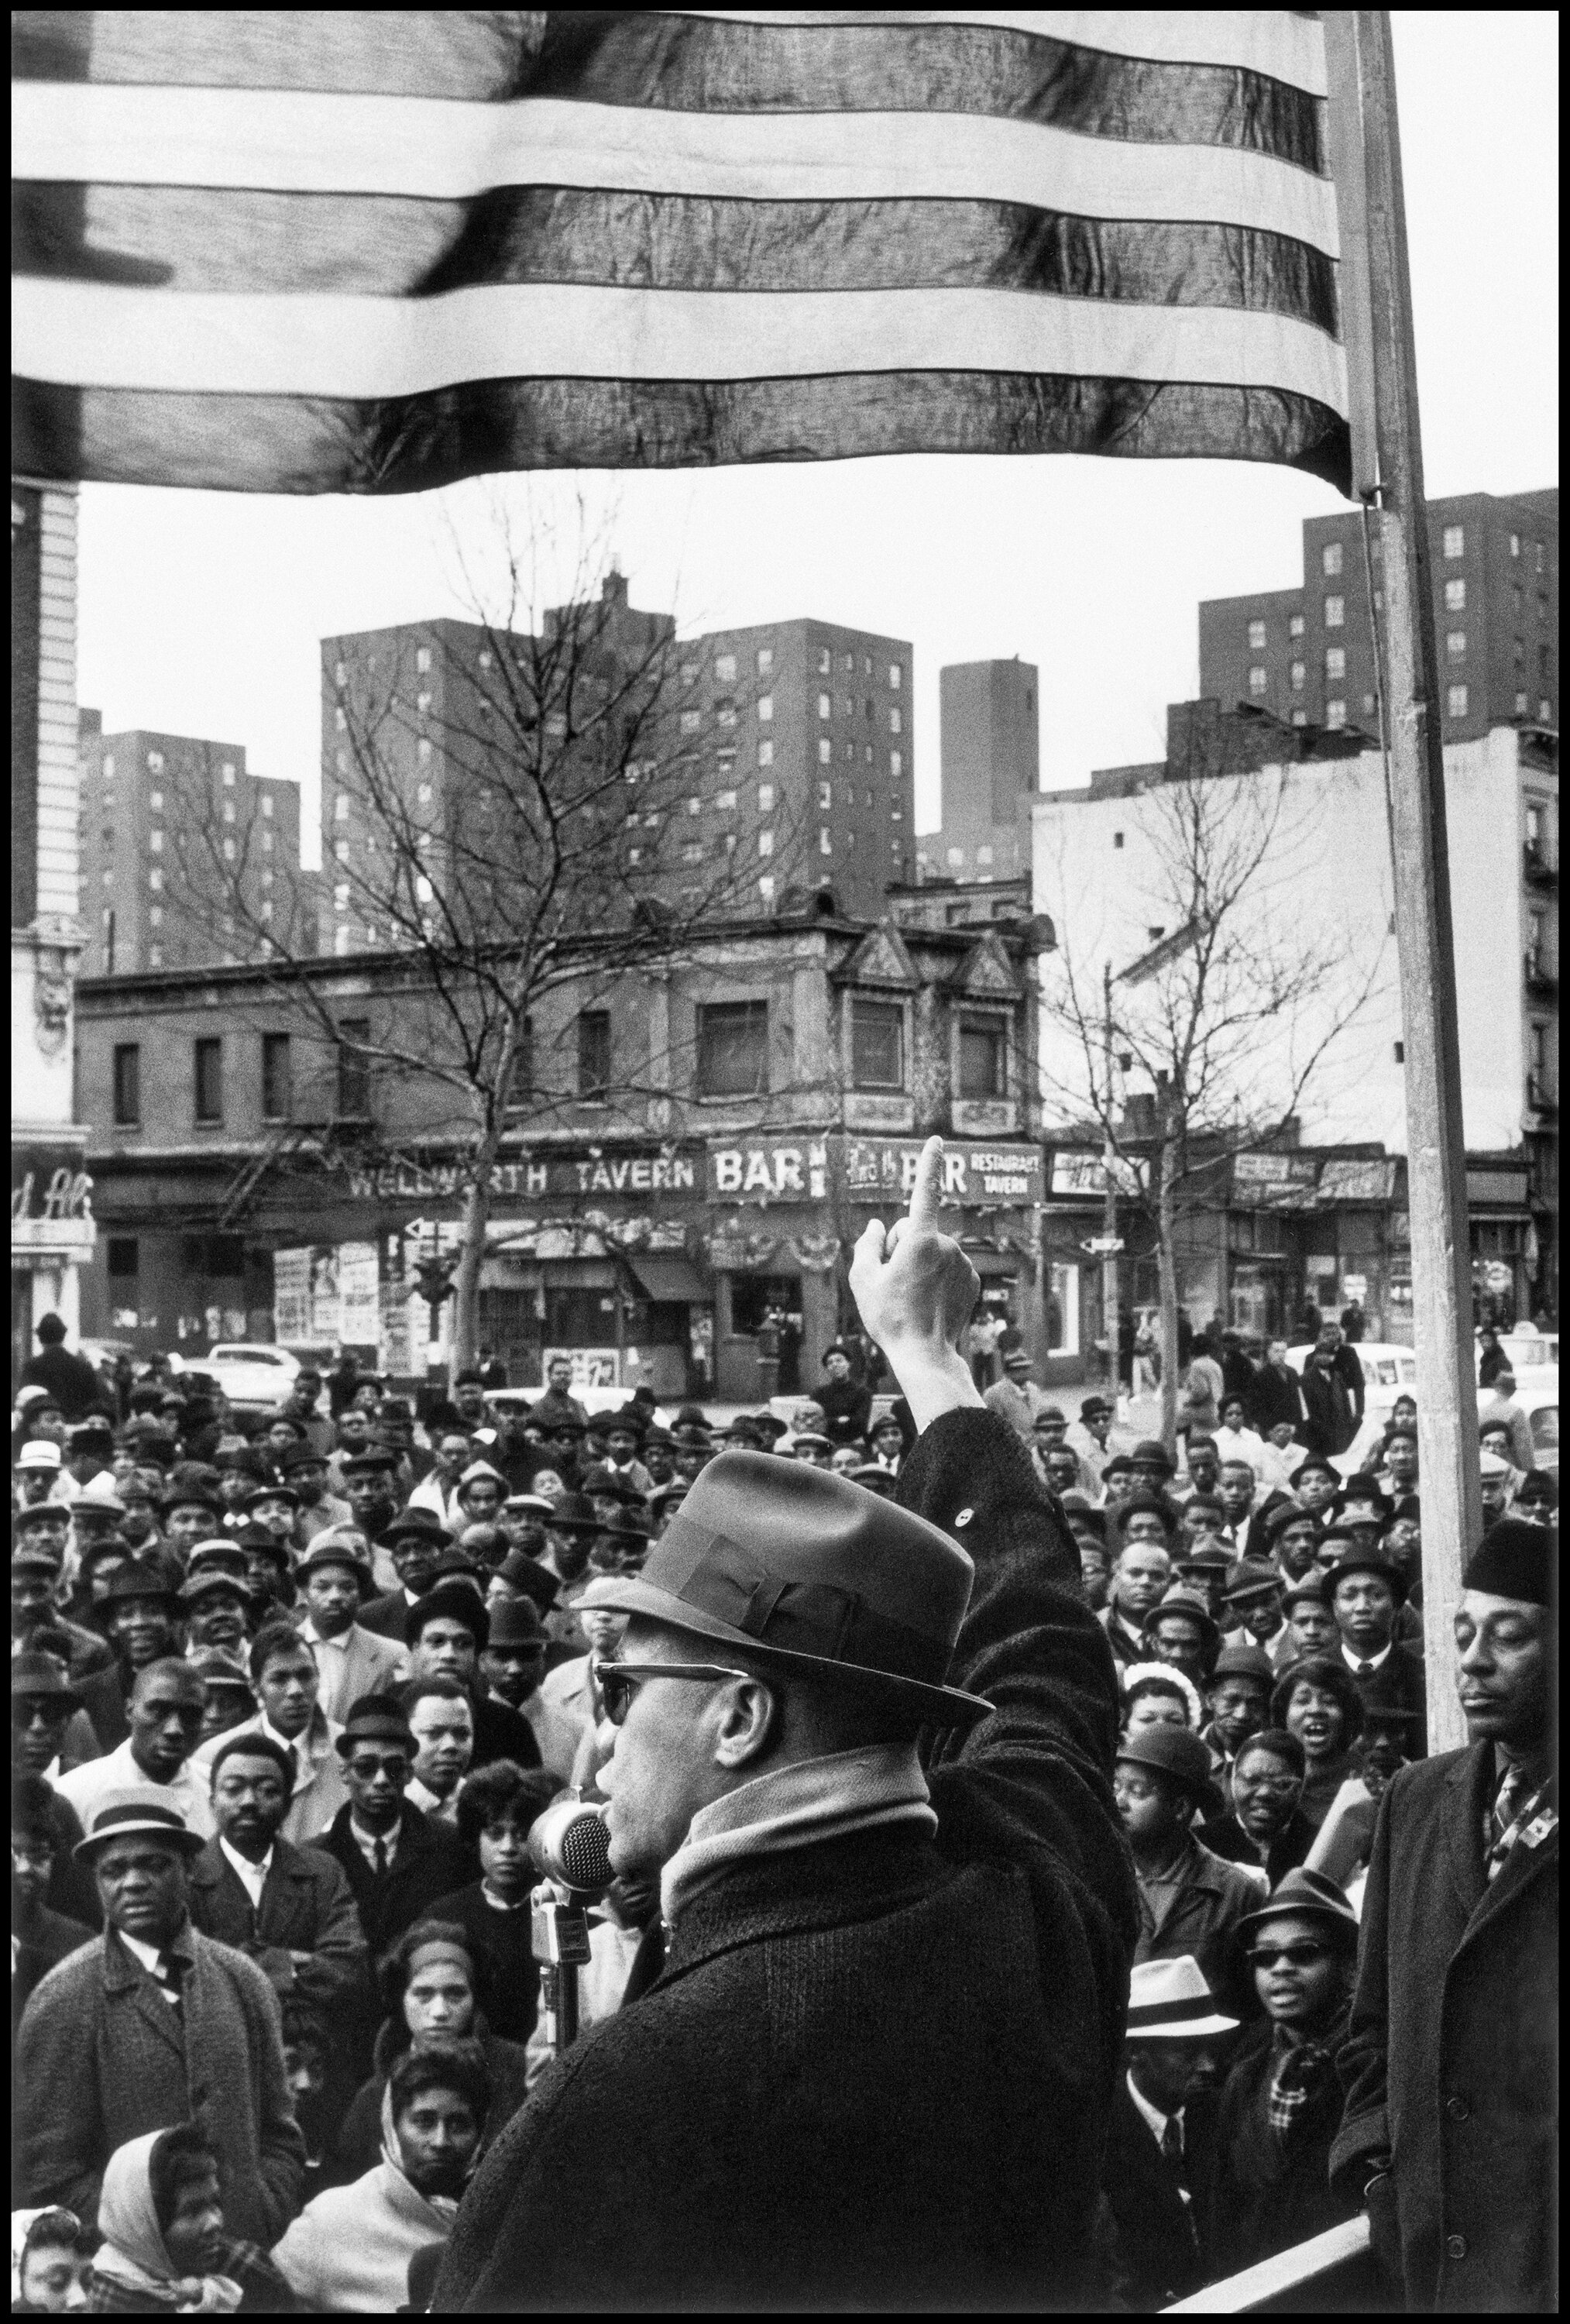  Malcolm X Gives Speech at Rally, Harlem, New York, New York, 1963 Gordon Parks Foundation authentication stamp on verso Gelatin silver print 40 x 30 inches, paper size Edition of 7    Credit: Photograph by Gordon Parks Copyright: Courtesy of and cop